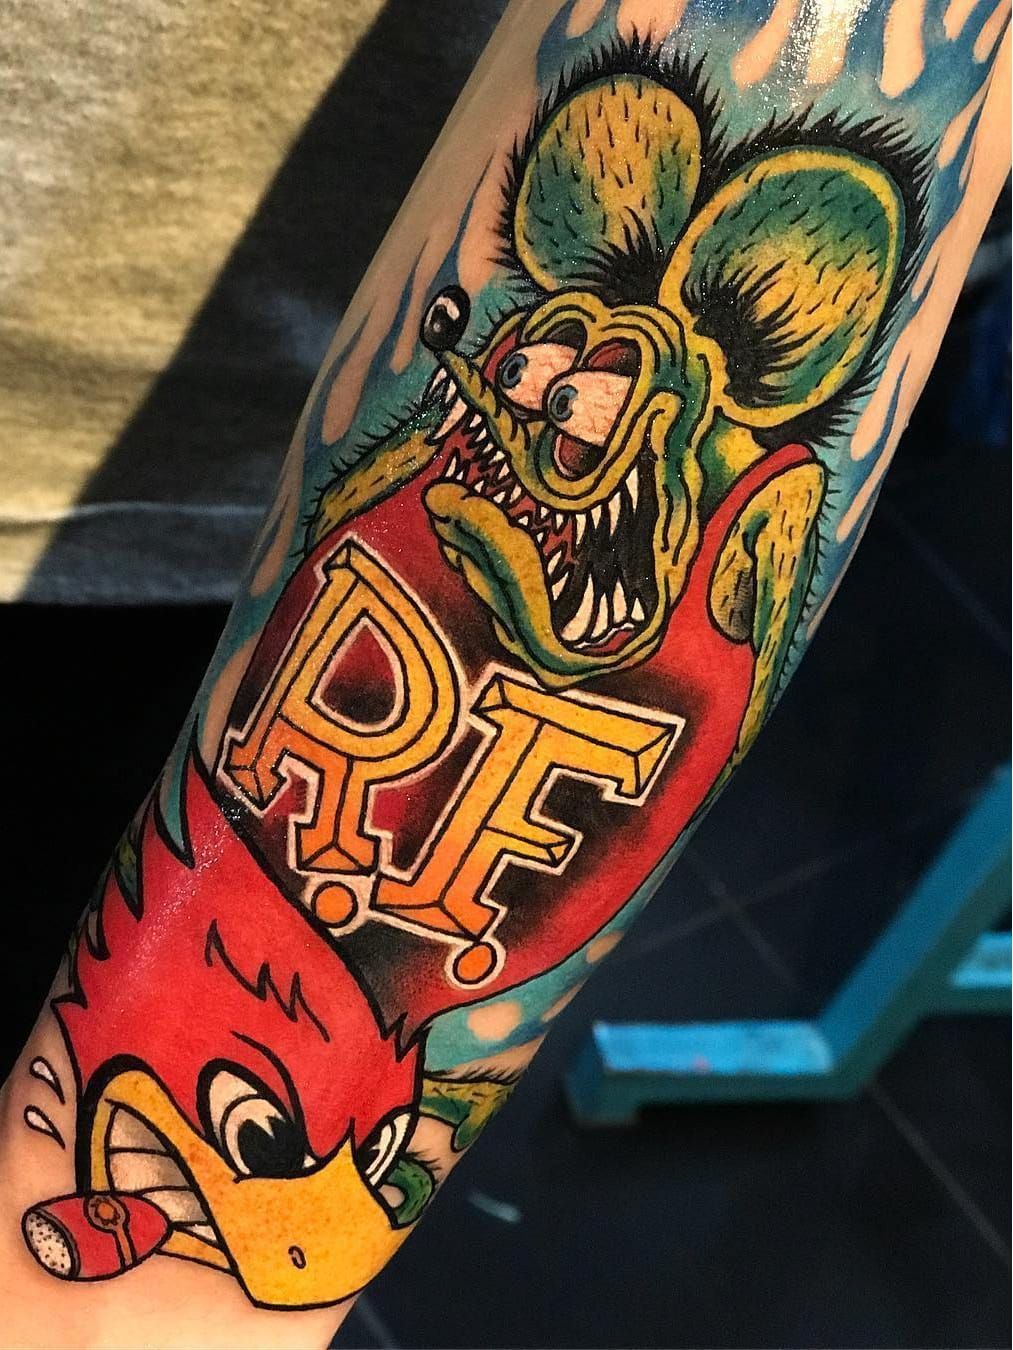 Rat fink tattoo meaning